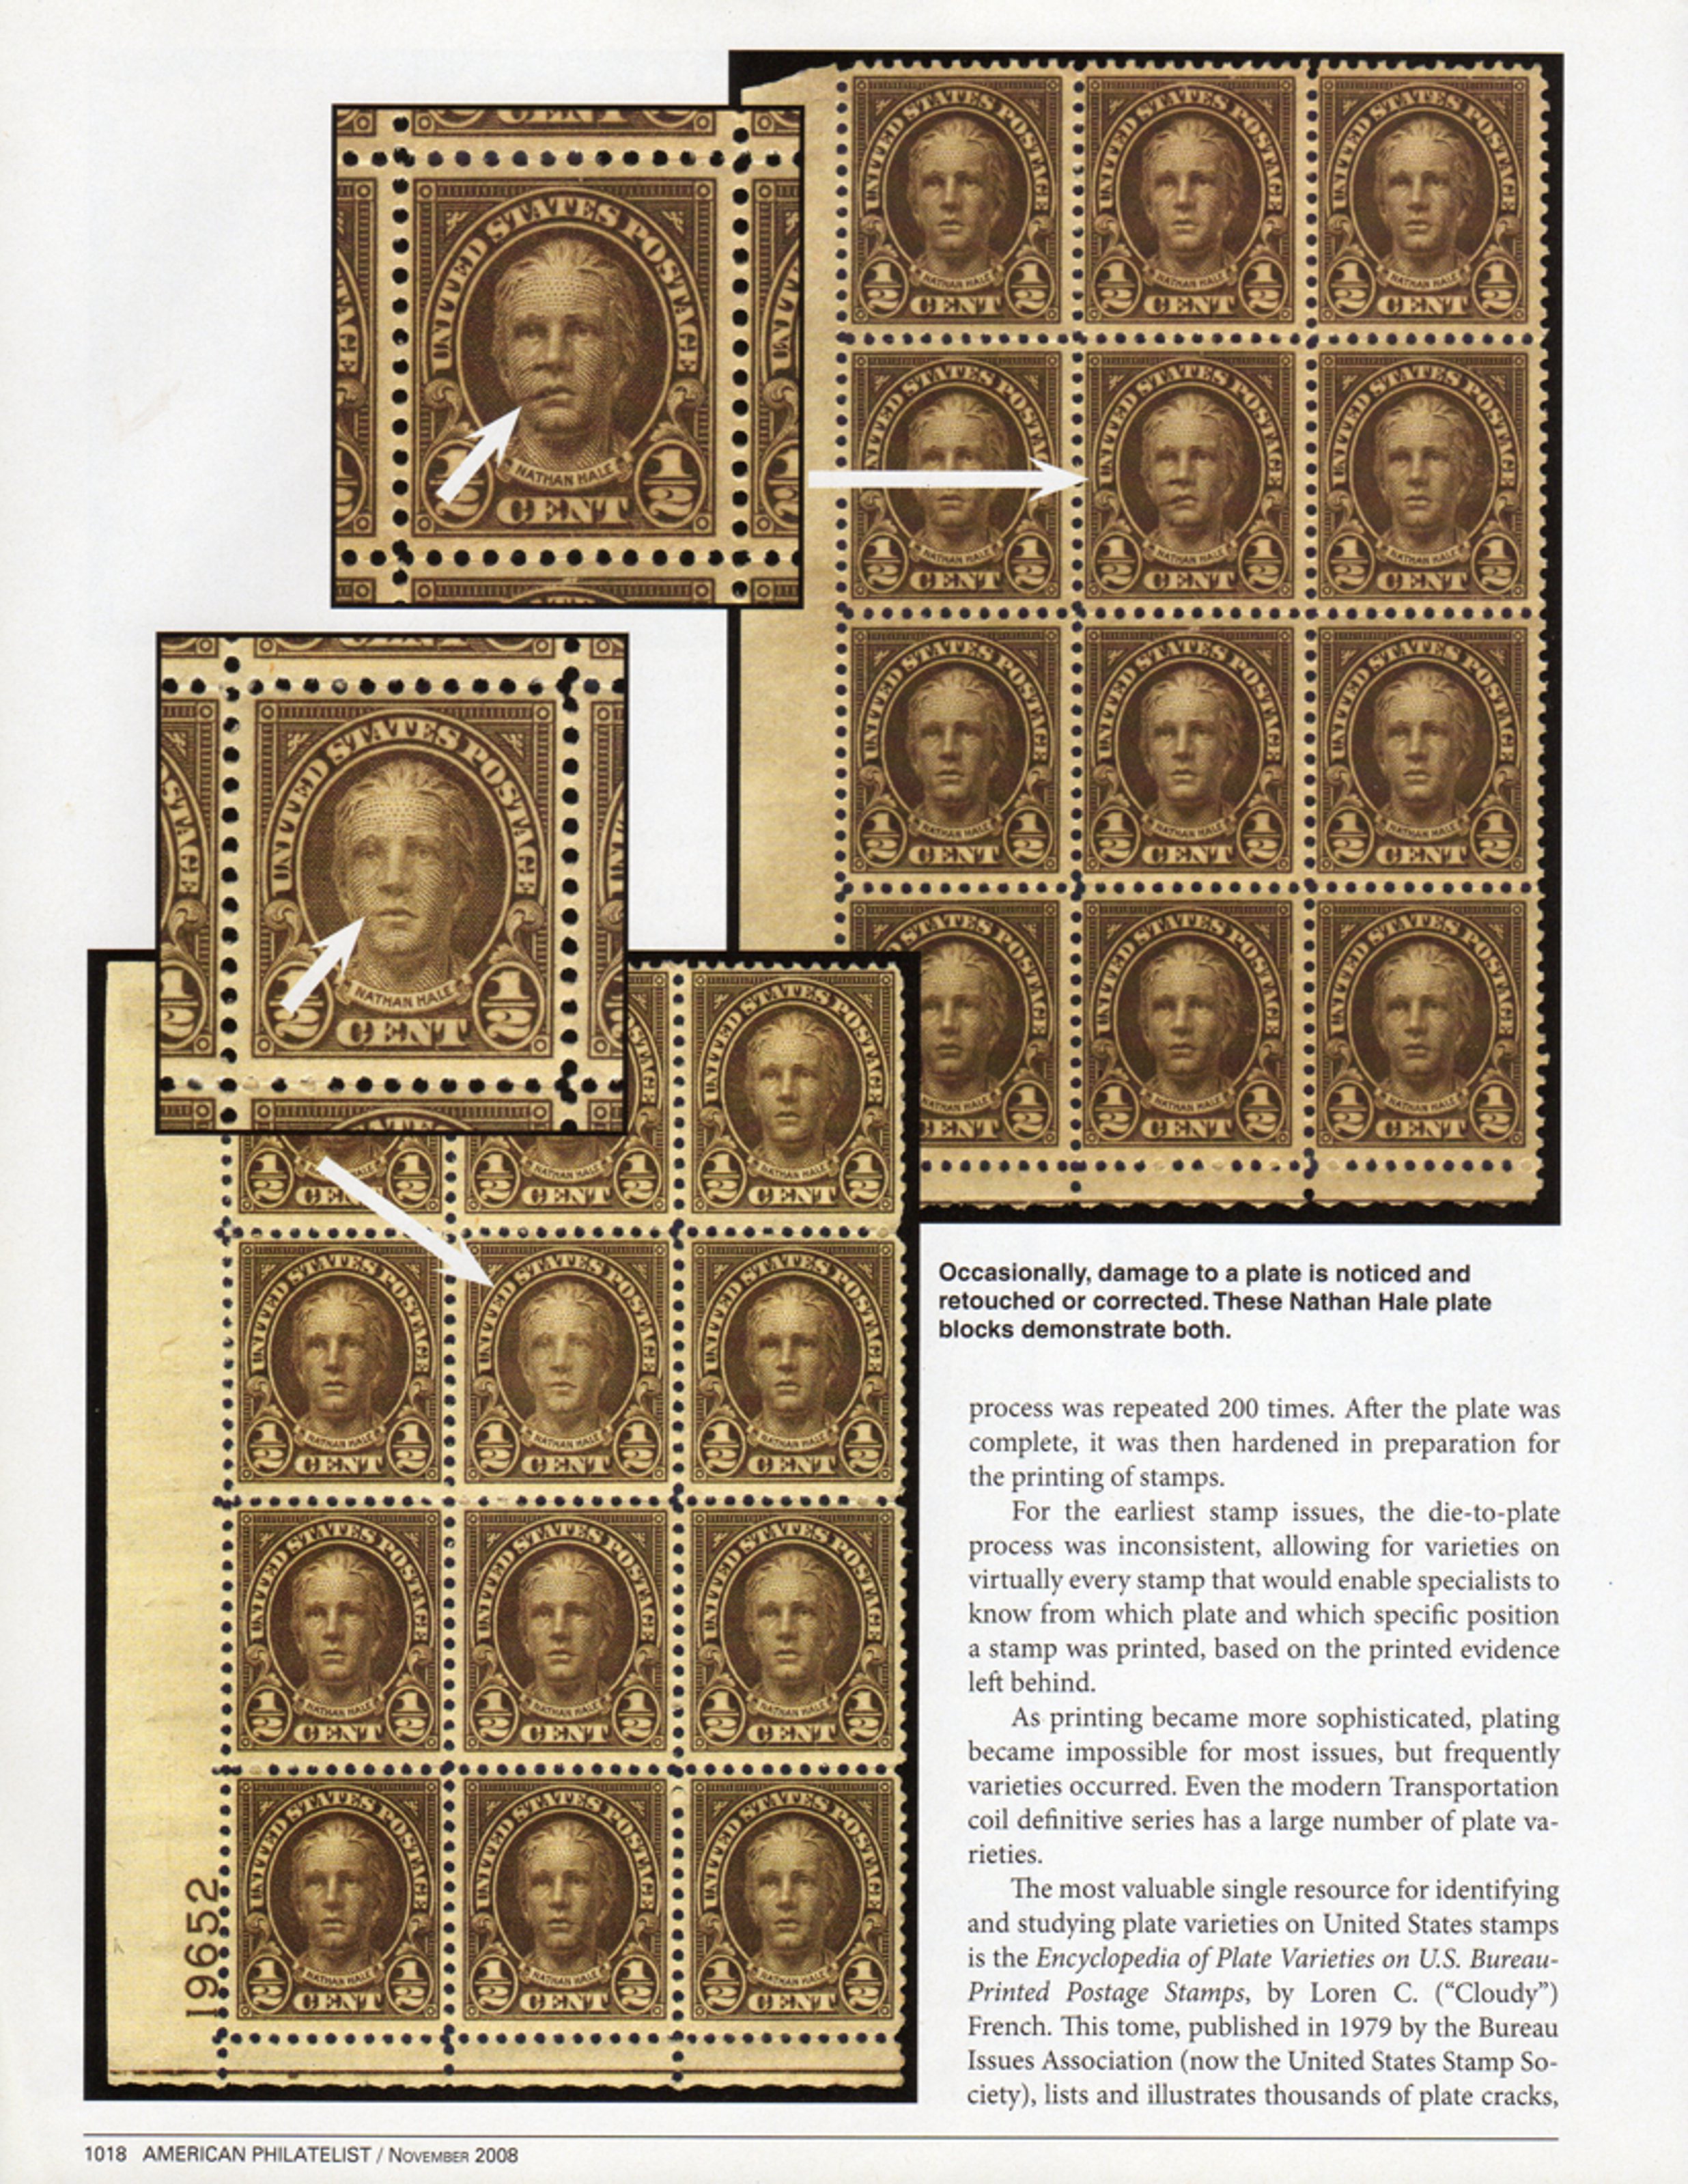 stamp errors, stamp errors, EFO, Youngblood, die-to-plate process, Transportation coil efinitive series, Encyclopedia of Plate Varieties on U.S. Bureau-Printed Postage Stamps, Cloudy French, 1979, Bureau Issues Association, United States Stamp Society, plate cracks